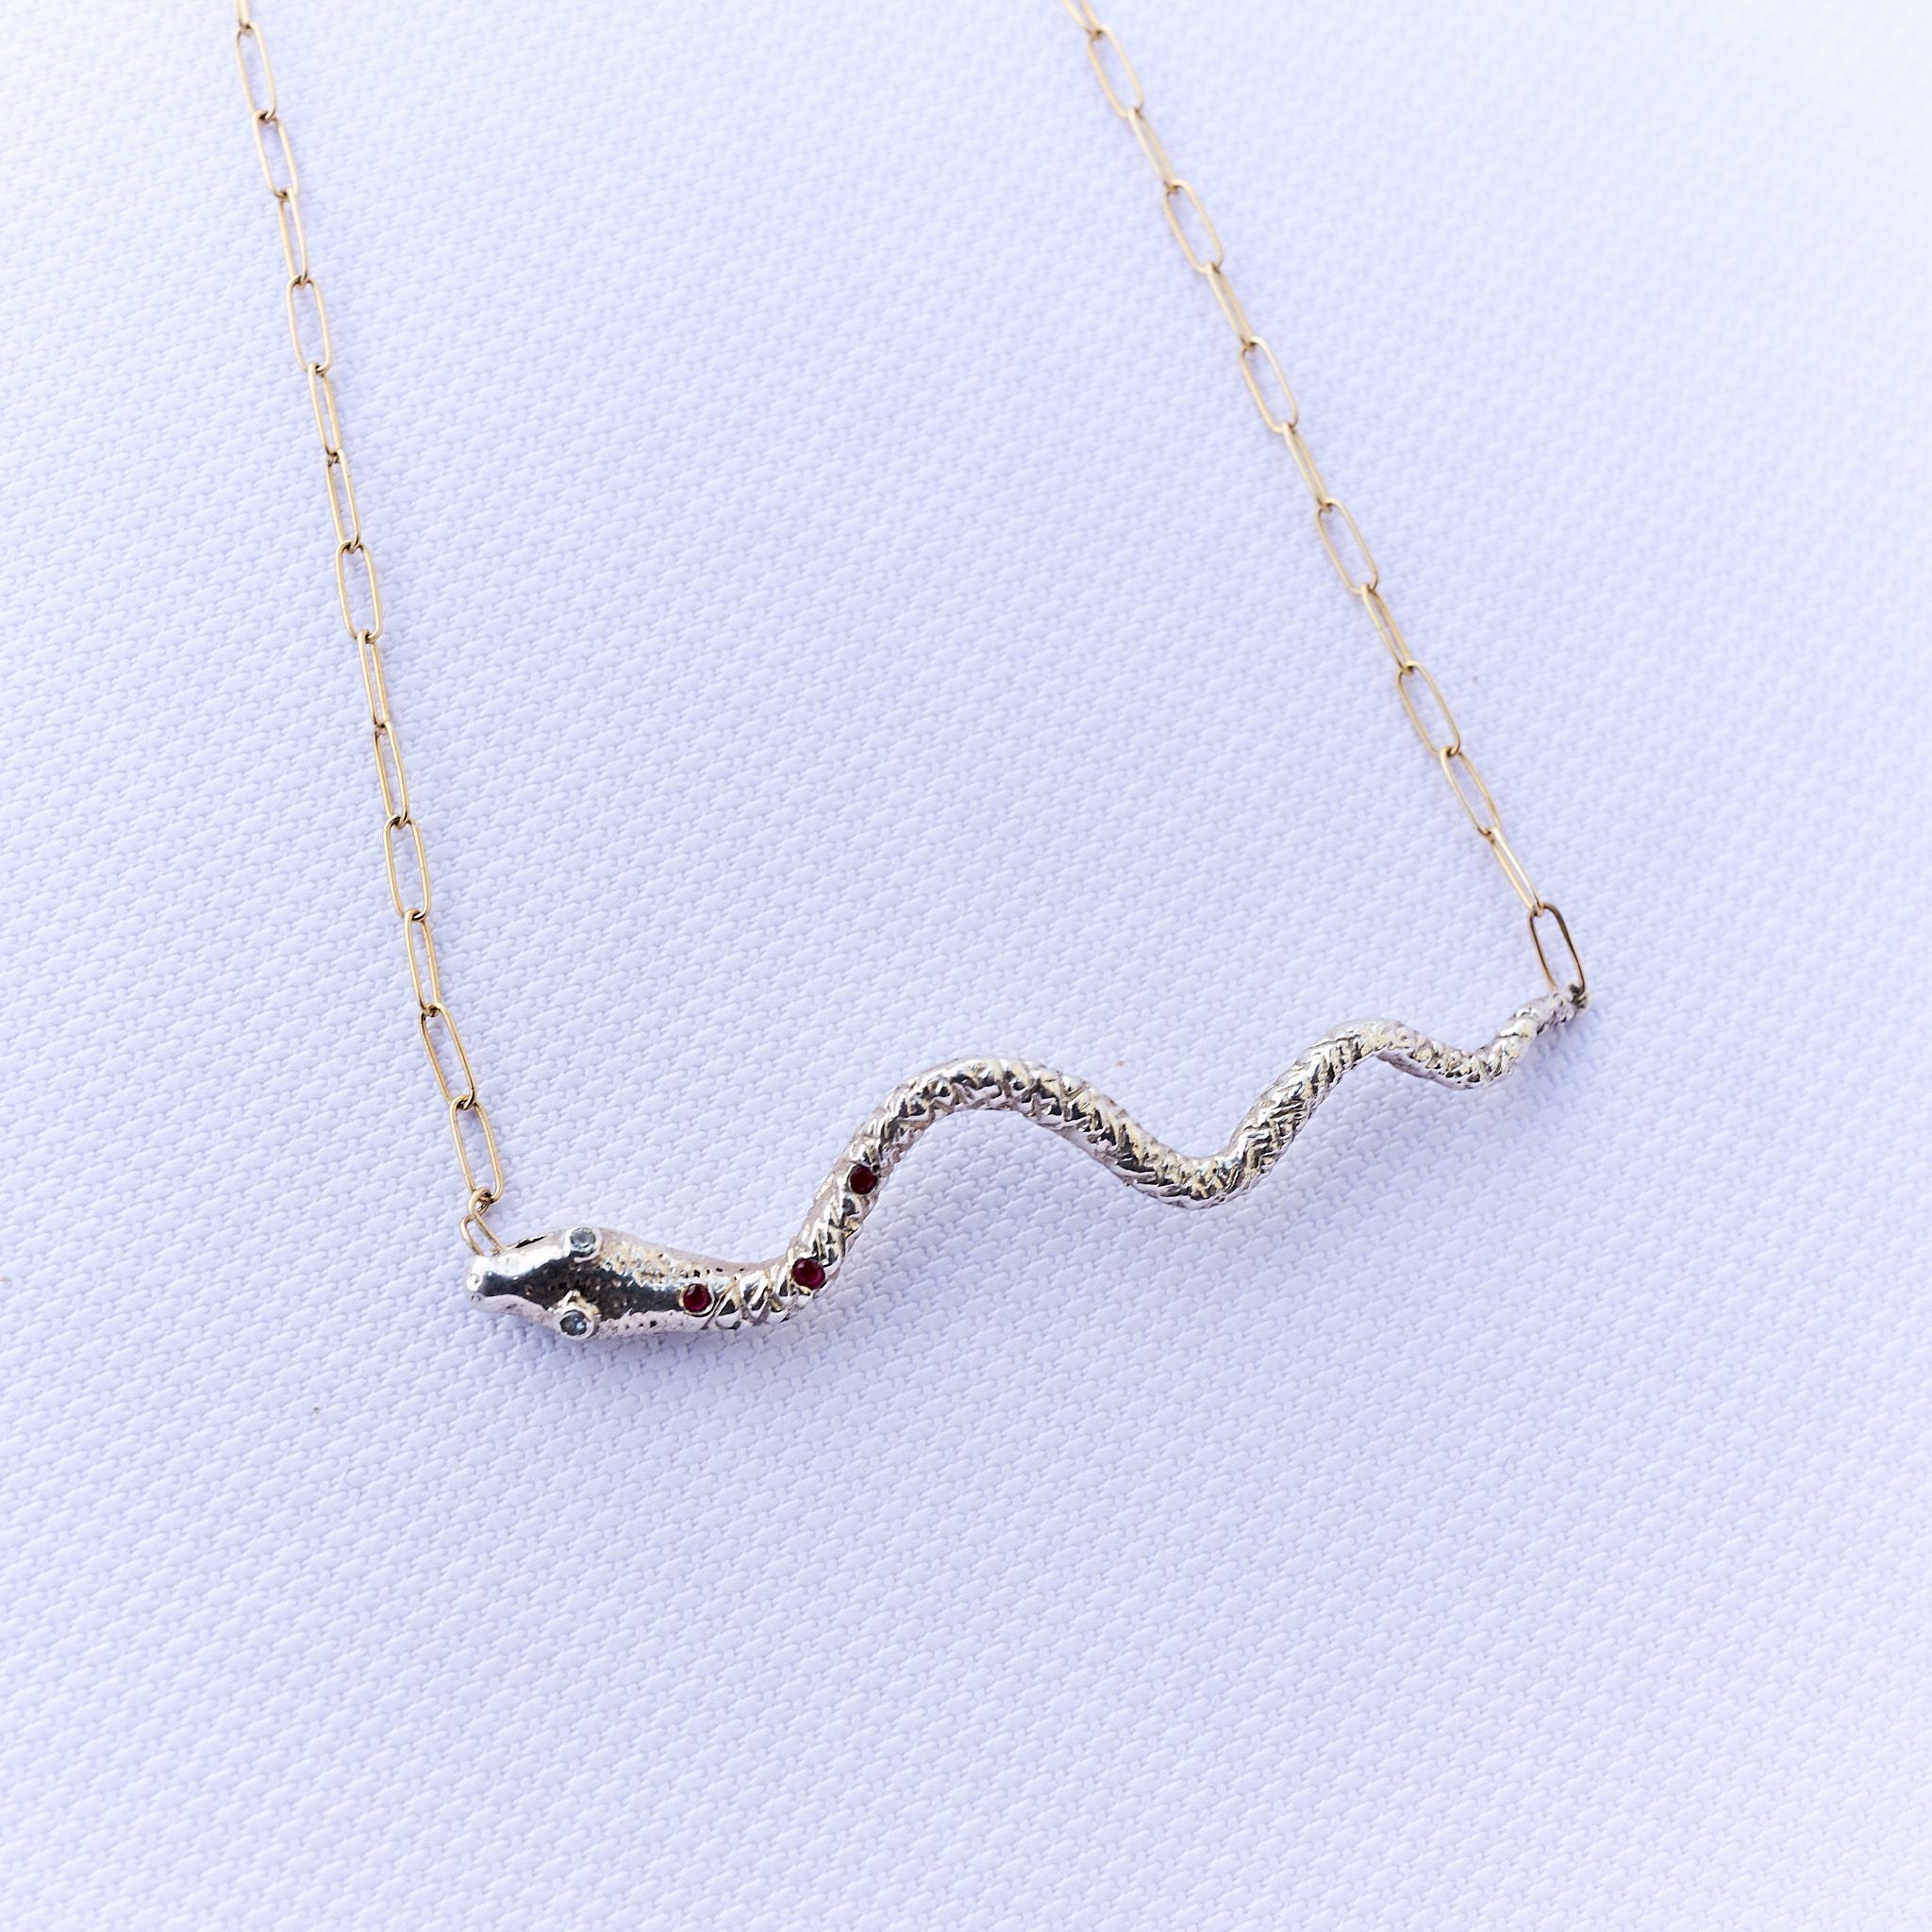 Snake Necklace Silver Ruby Iolite Gold Filled Chain J Dauphin For Sale 2